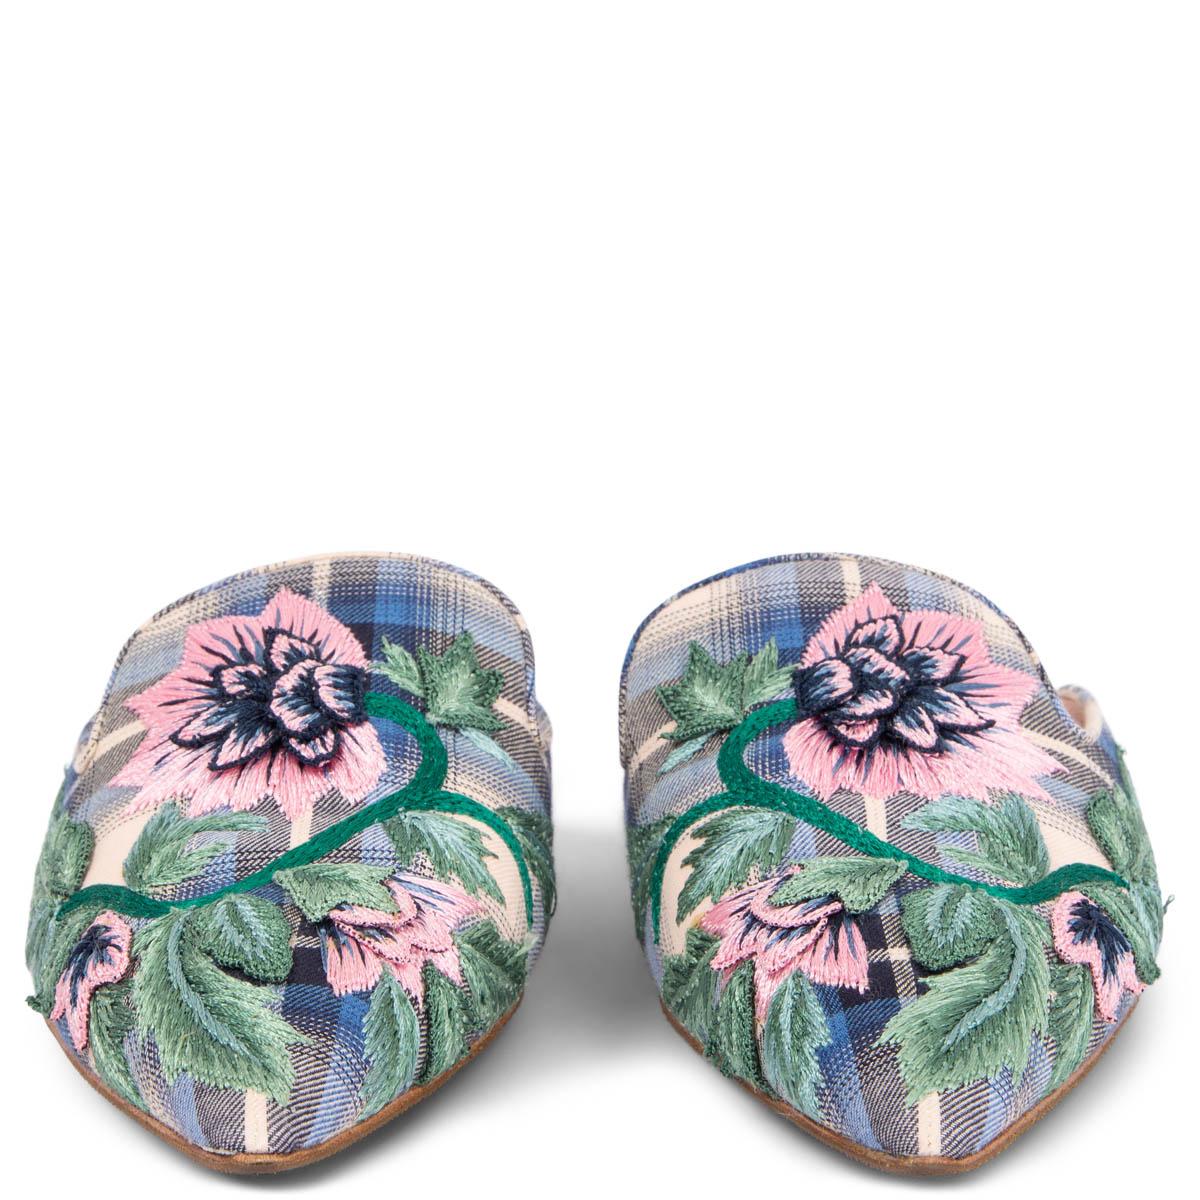 100% authentic Alberta Ferretti Mia floral embroidered mules in nude, navy and blue plaid wool fabric with details in green, baby pink and navy blue. Have been worn once or twice and are in excellent condition. Come with dust bag. Rubber sole got